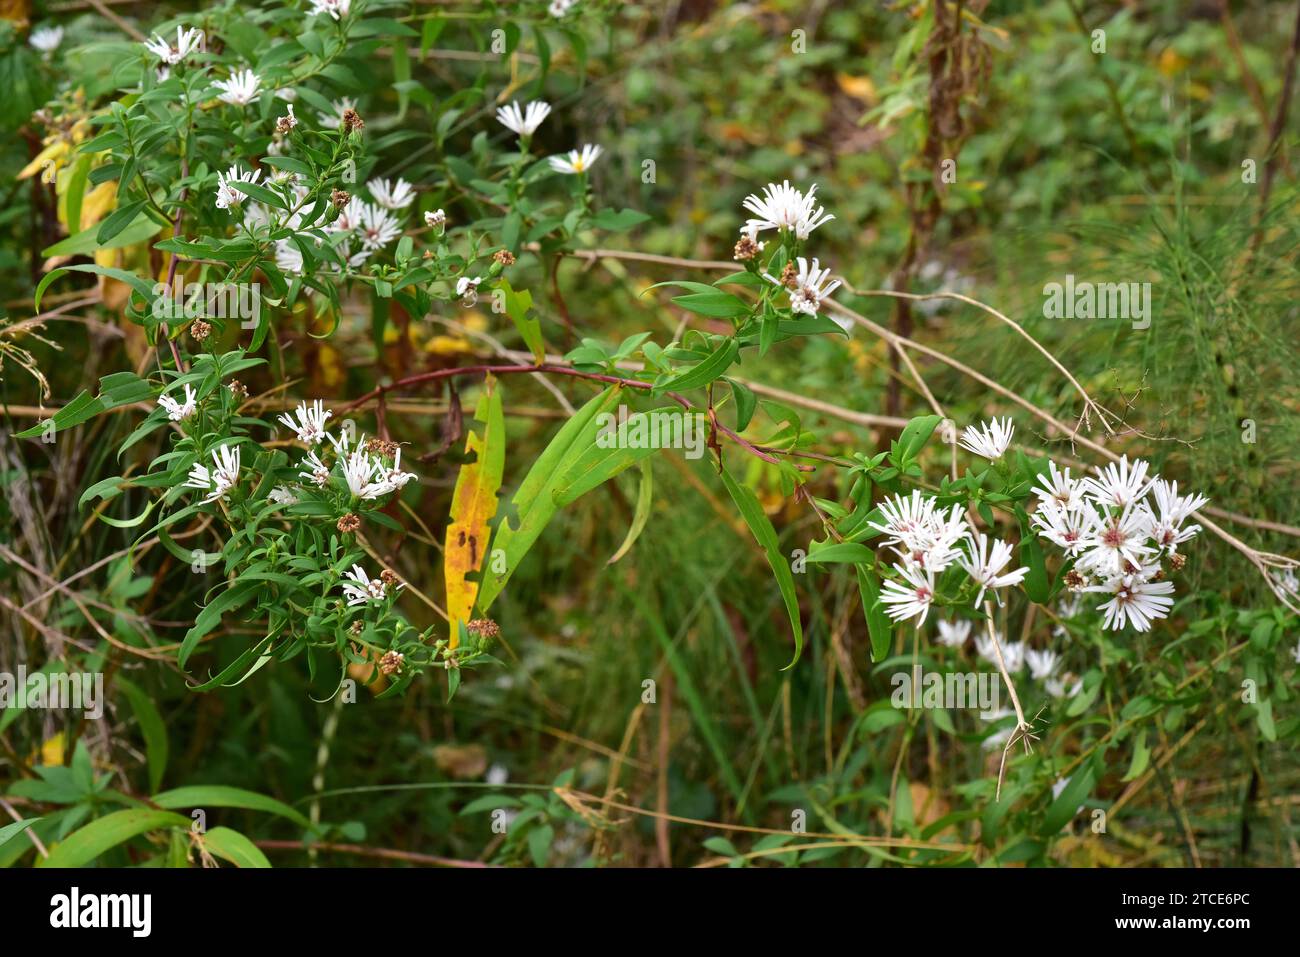 Frost aster (Aster pilosus or Symphyotrichum pilosum) is a perennial plant native to eastern North America and naturalized in Europe. This photo was t Stock Photo